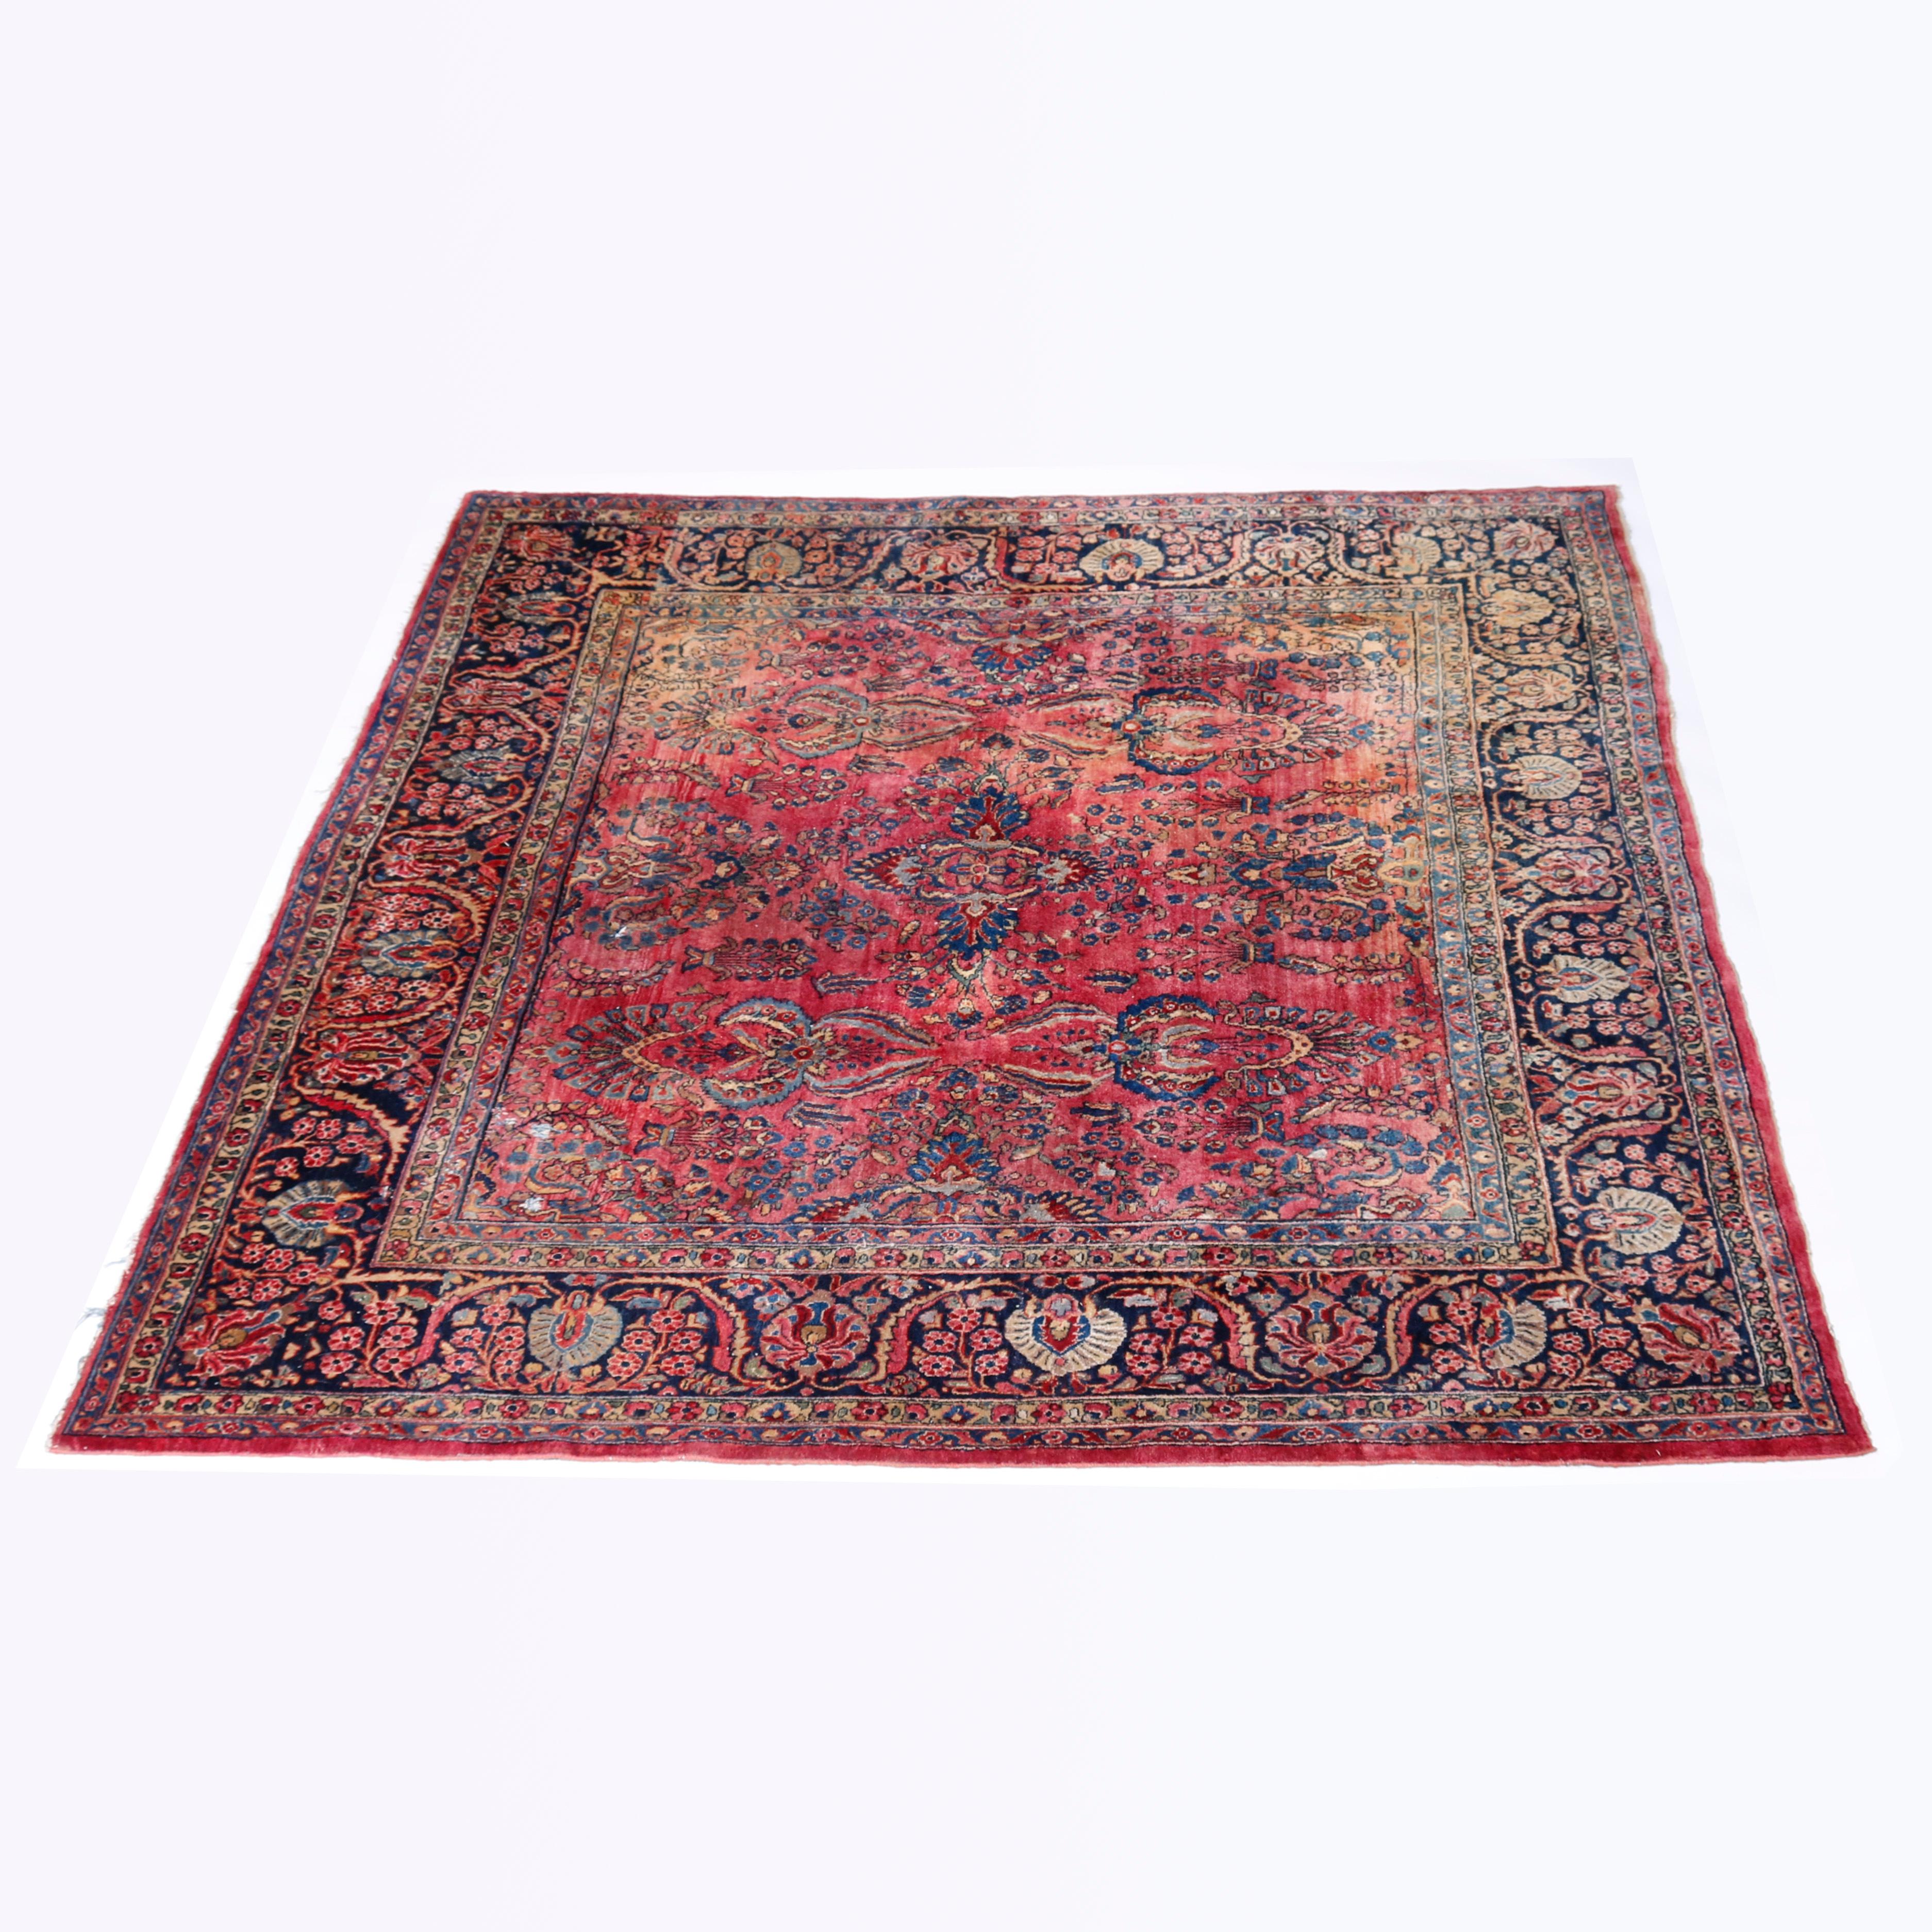 An antique room size Persian Sarouk oriental carpet offers wool construction with central medallion and allover floral and foliate design on red ground, c1930

Measures - 106.5''H x 86''W x .5''D.